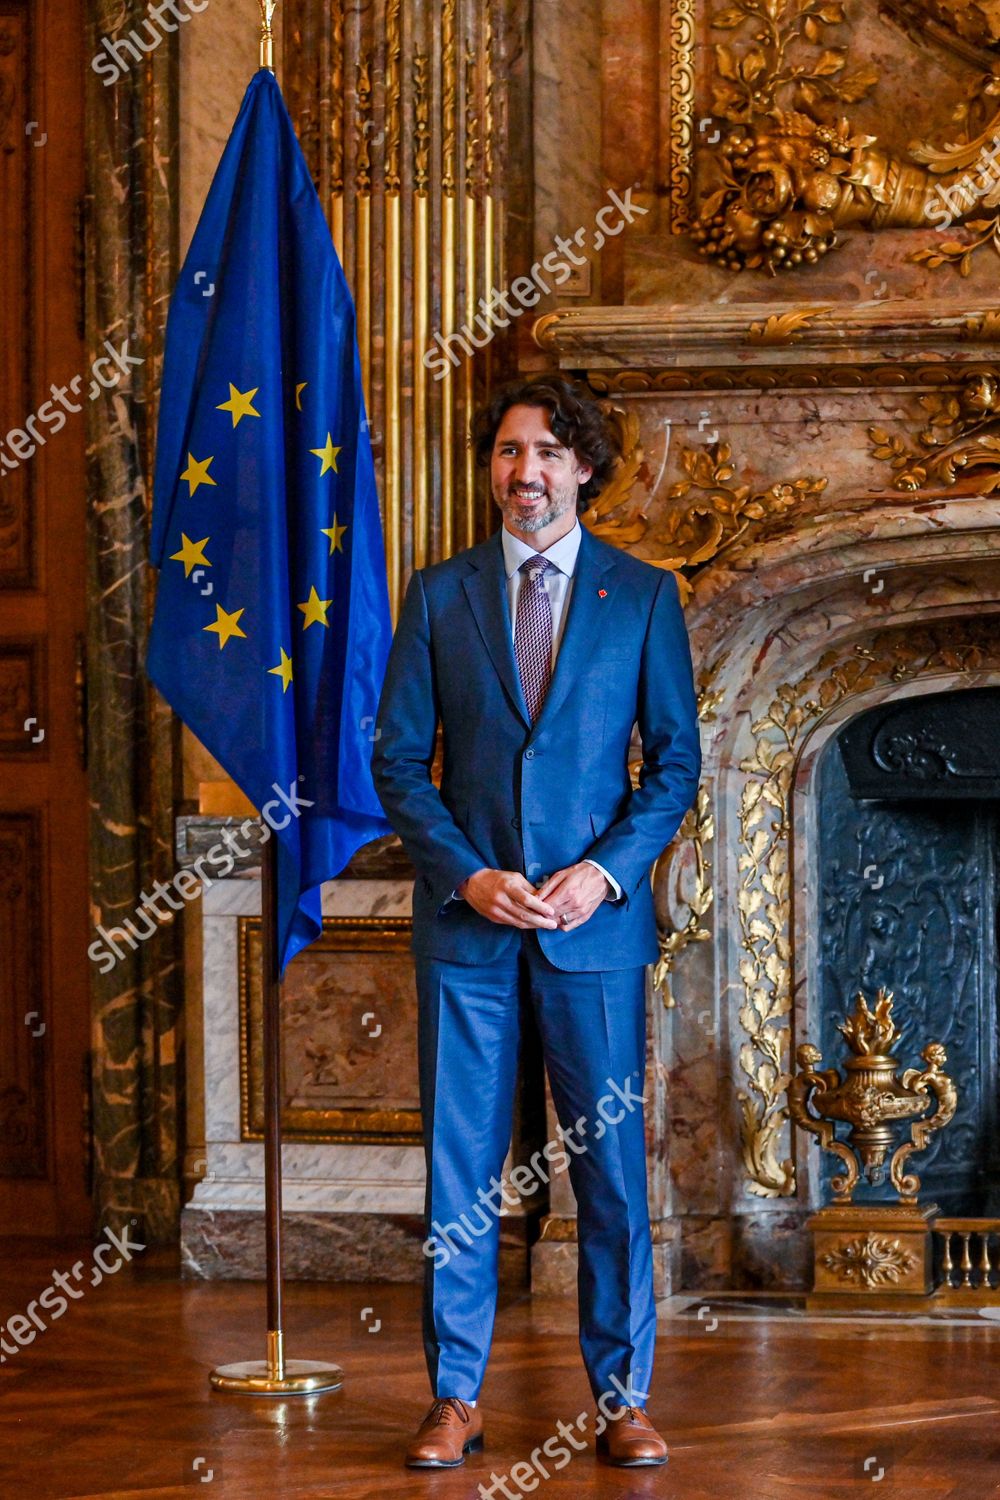 king-philippe-receives-canadian-prime-minister-justin-trudeau-brussels-belgium-shutterstock-editorial-12084205b.jpg